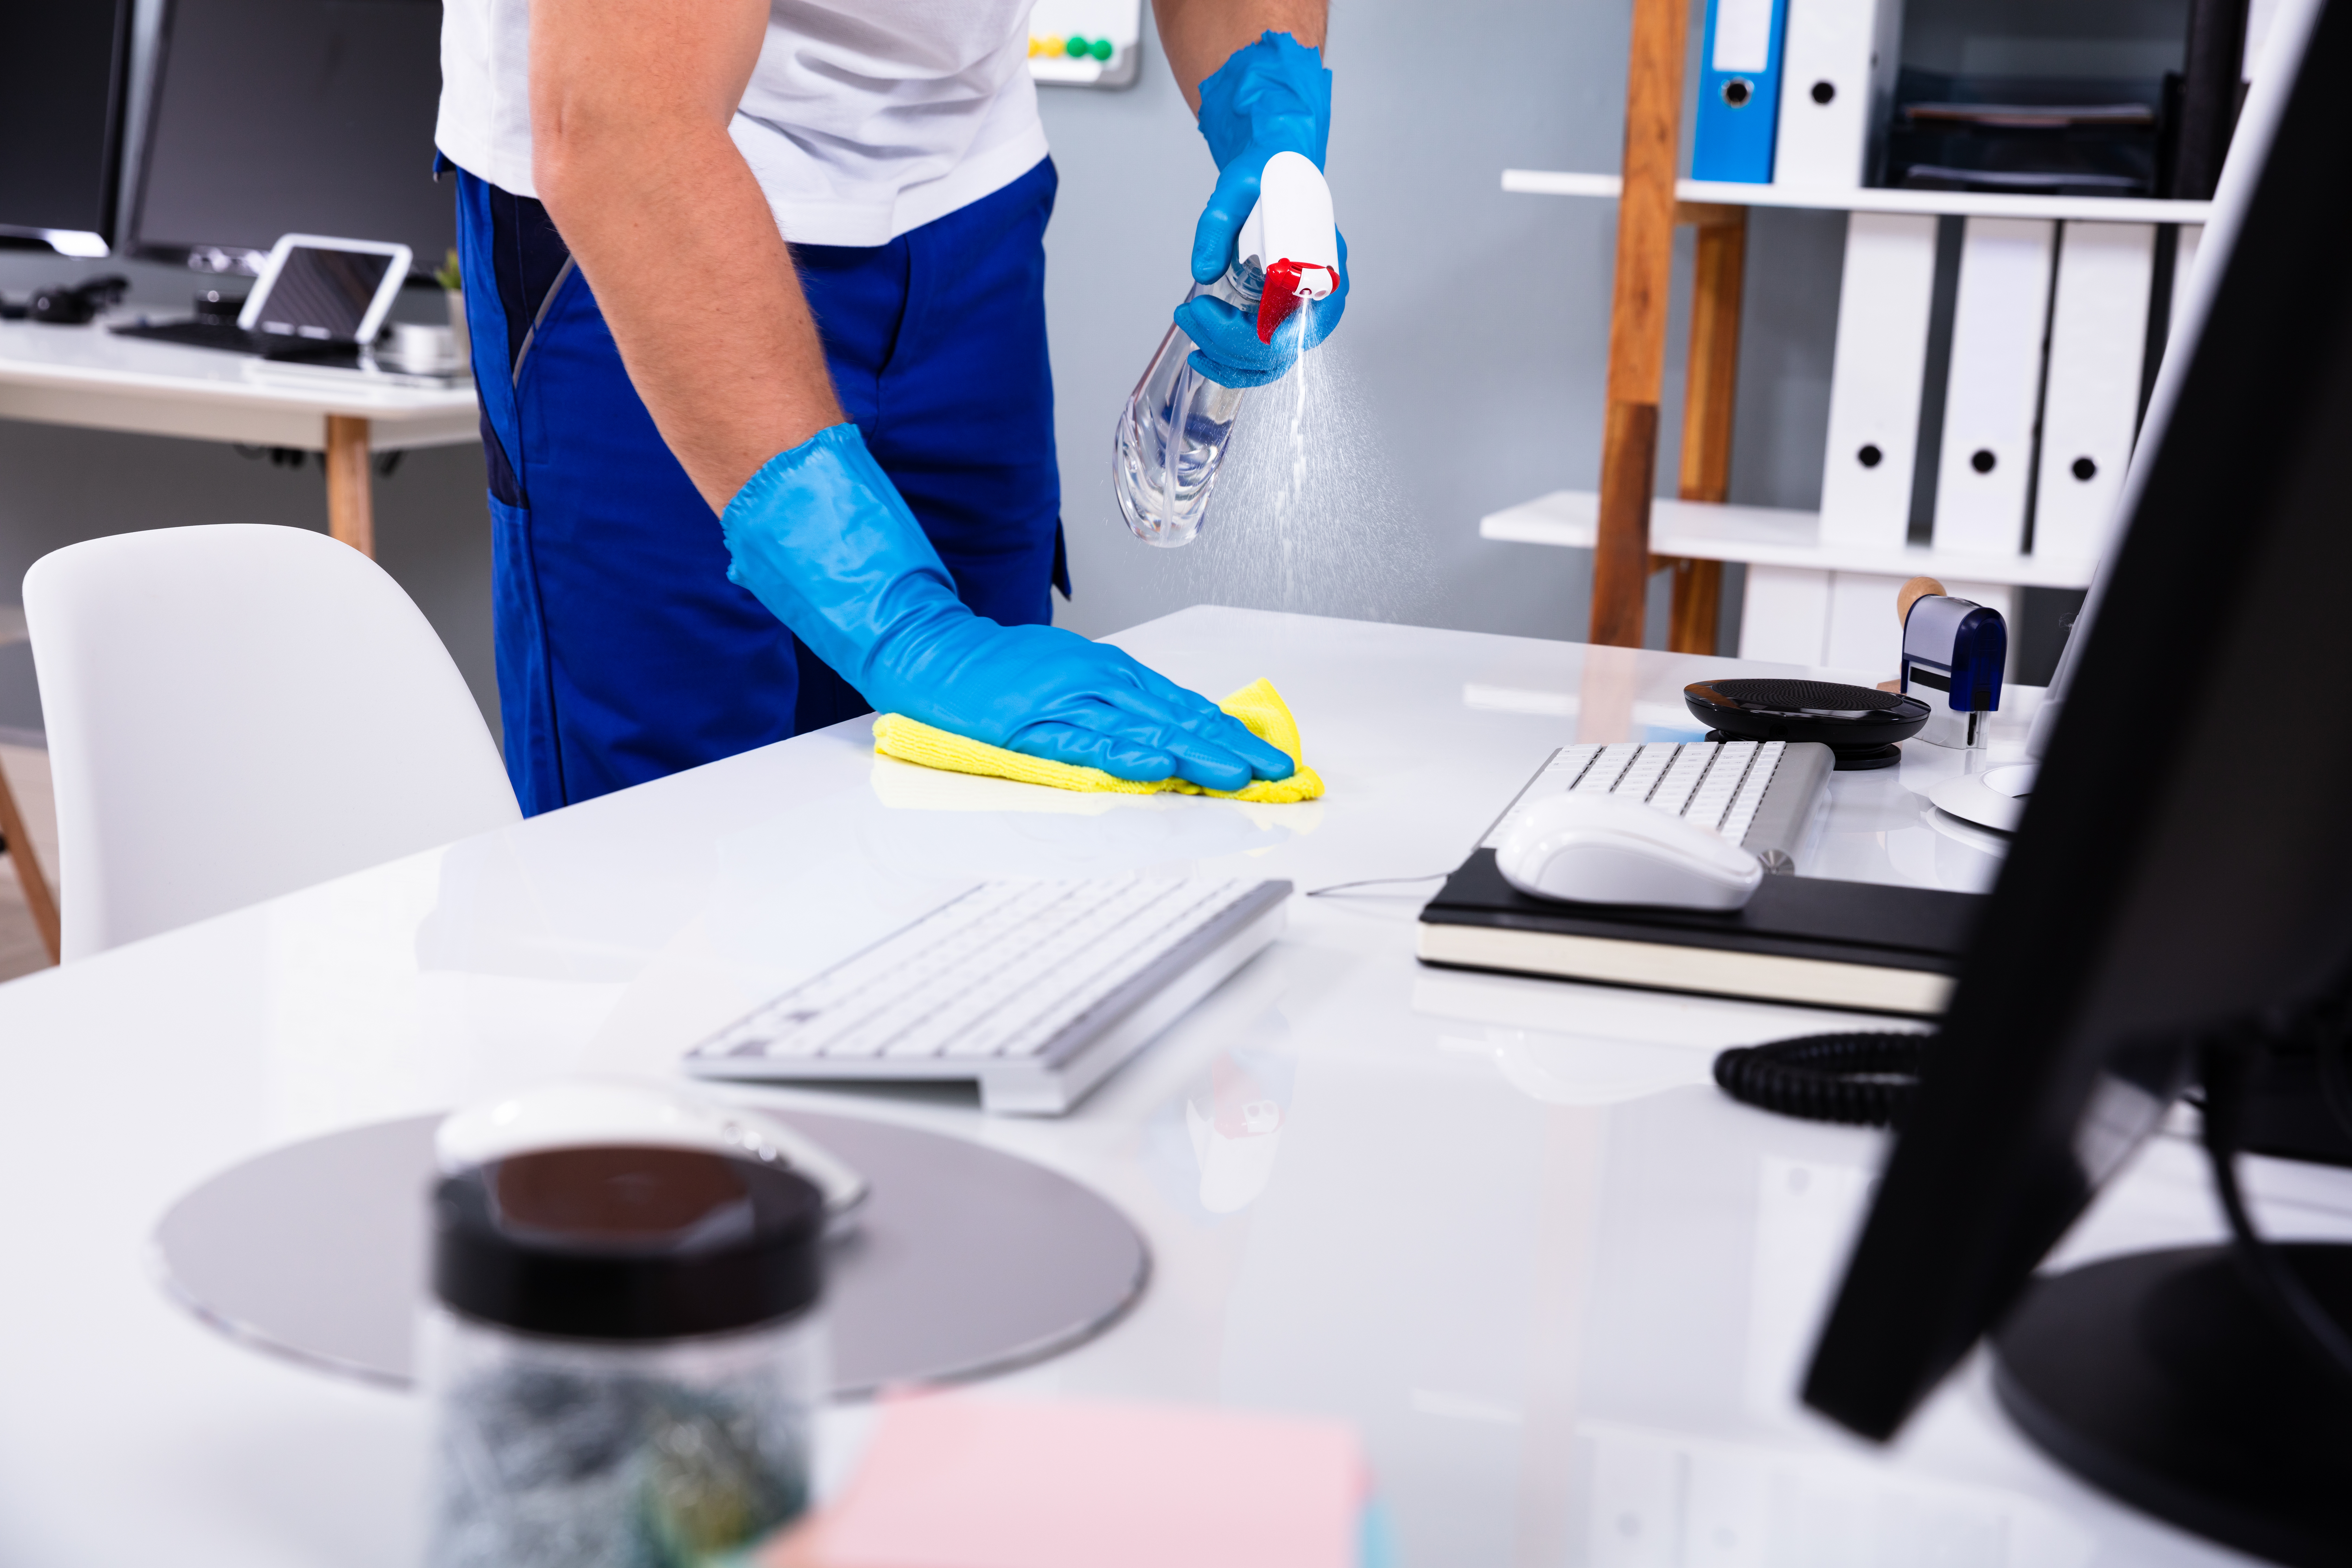 Your Guide For Maintaining Cleanliness & Sanitation in Non-Medical Medical Spaces